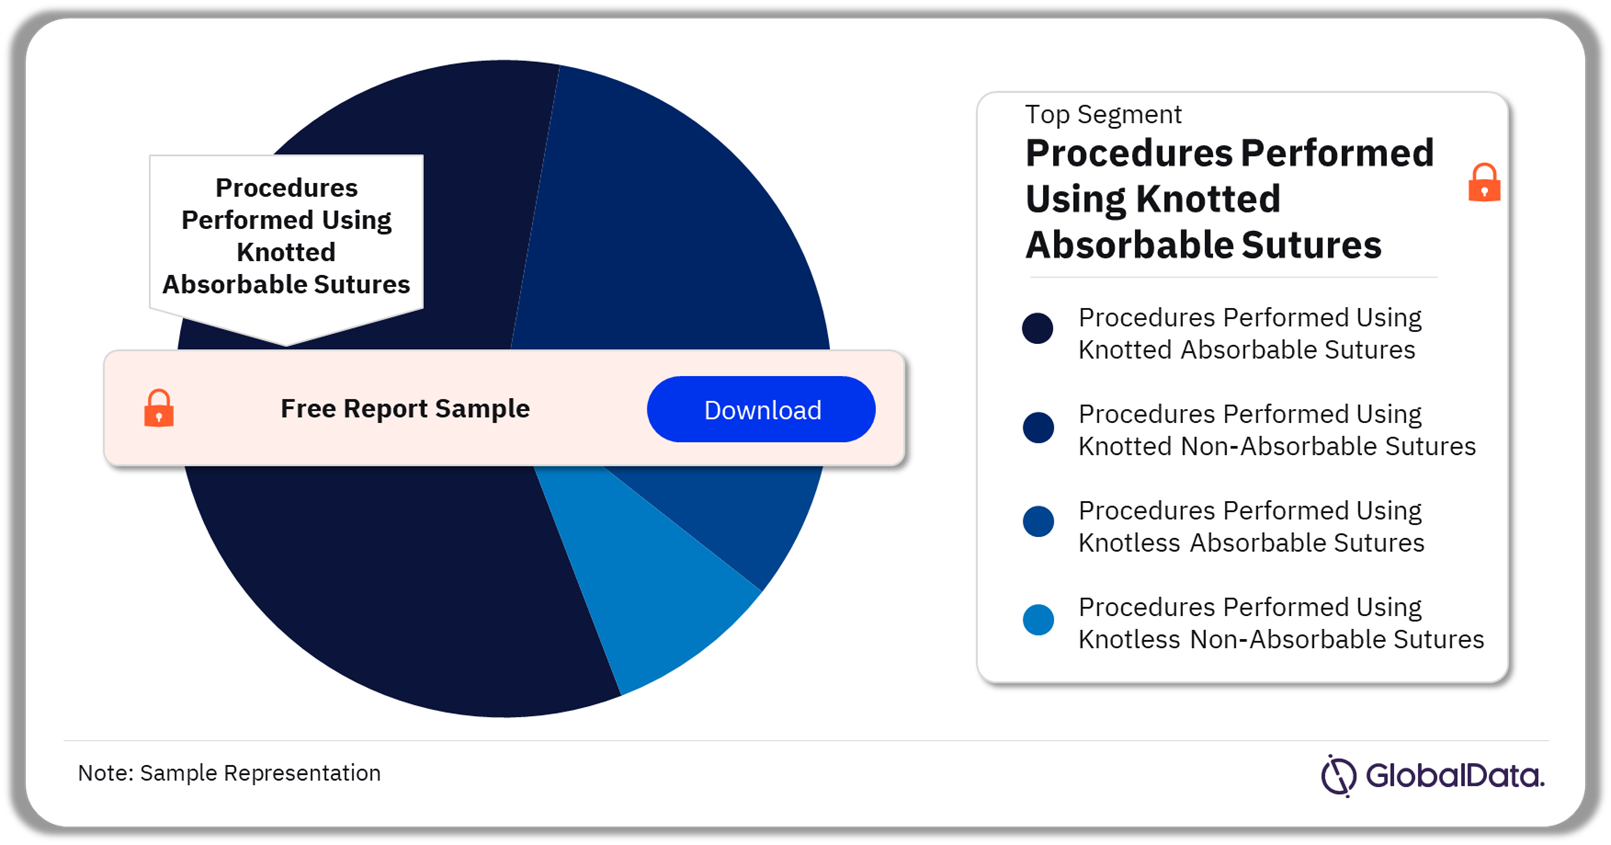 BRIC Surgical Suture Procedures Market Analysis by Segments, 2022 (%)